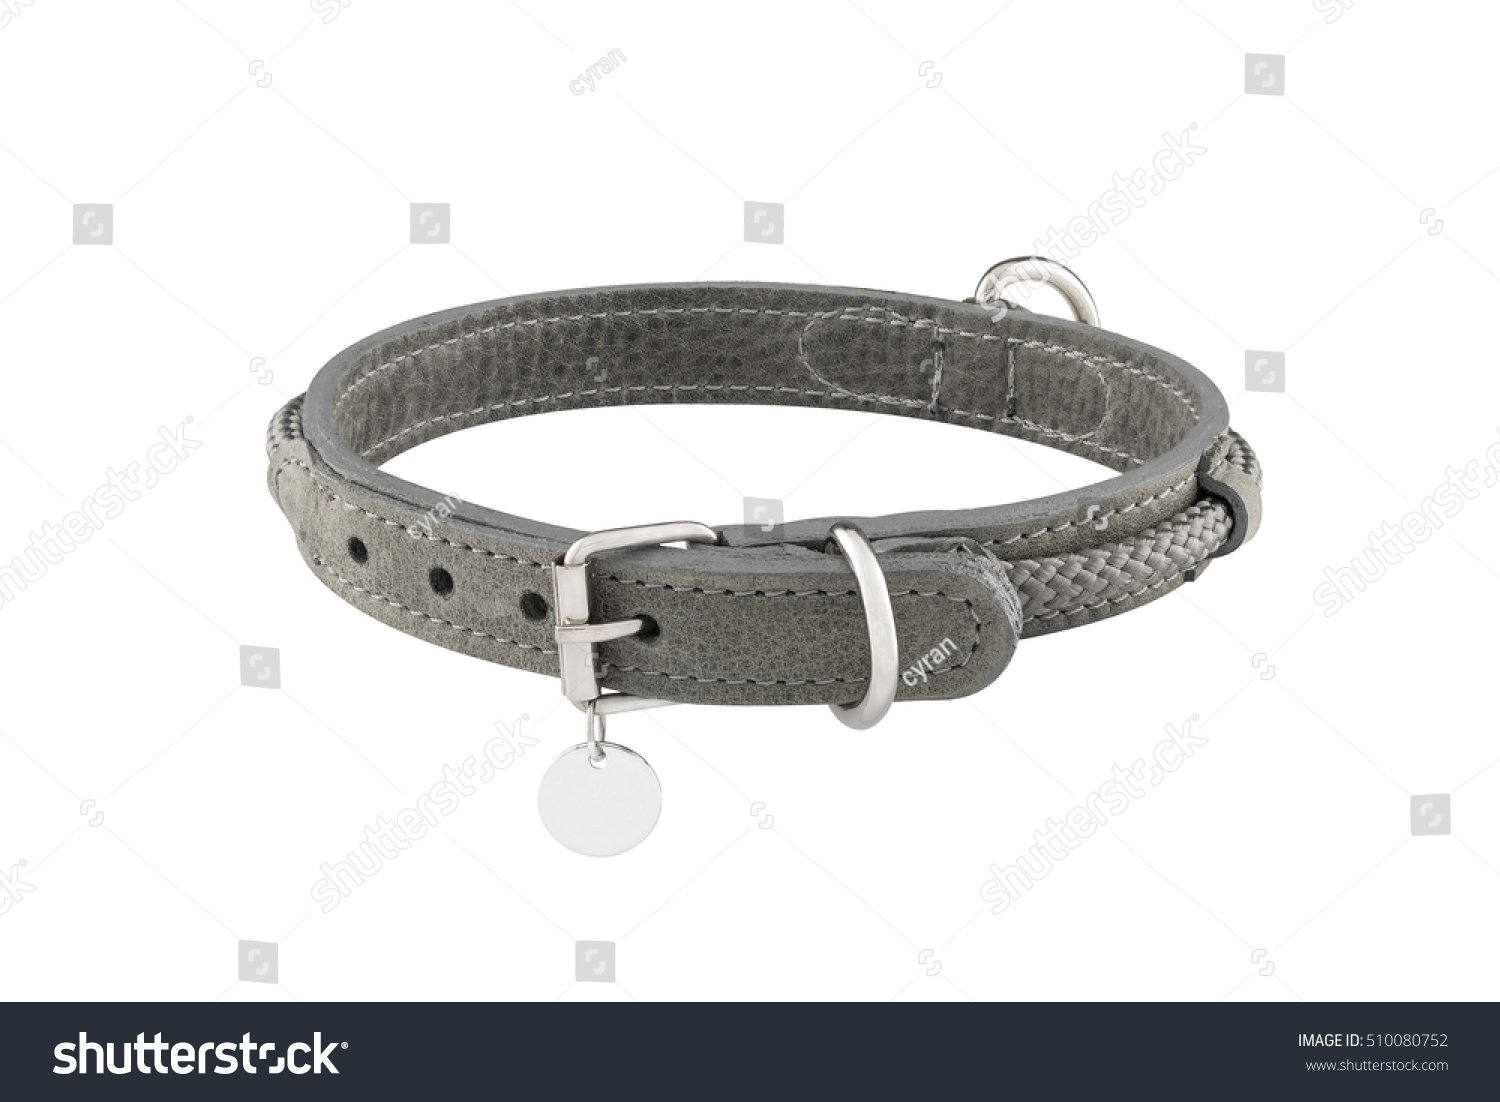 dog collar isolated on the white background #510080752